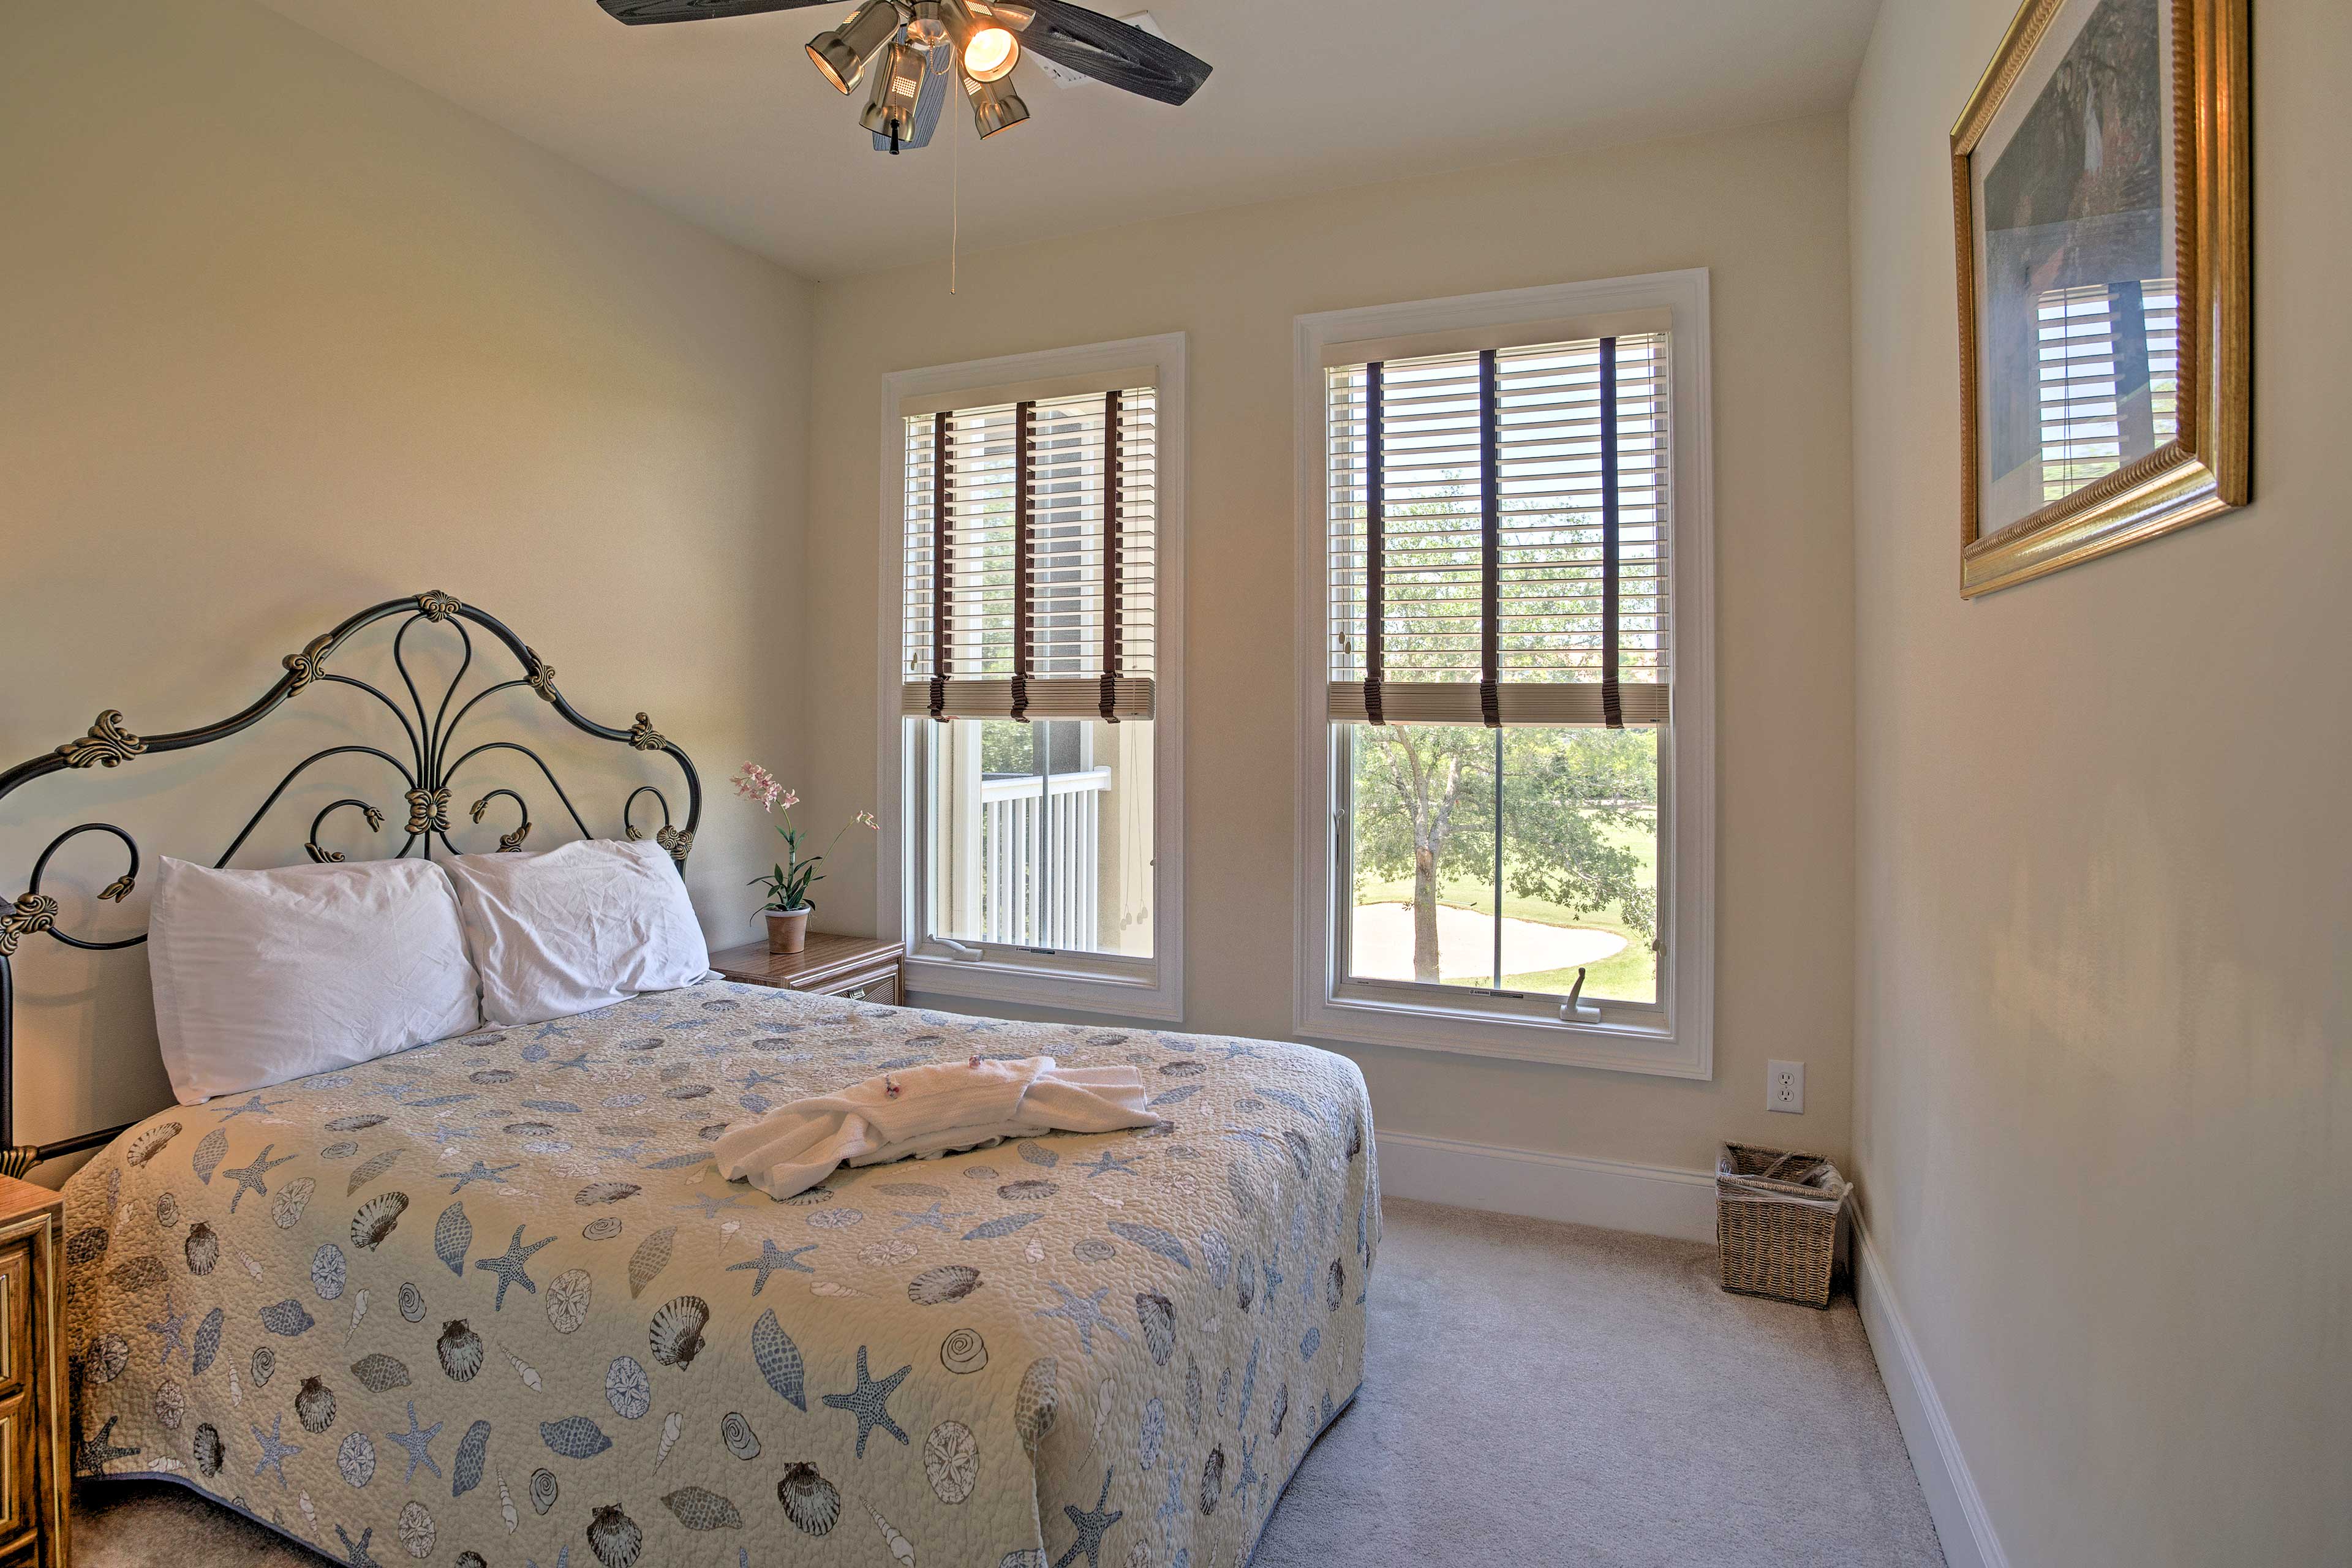 The guest bedroom offers an additional queen bed.